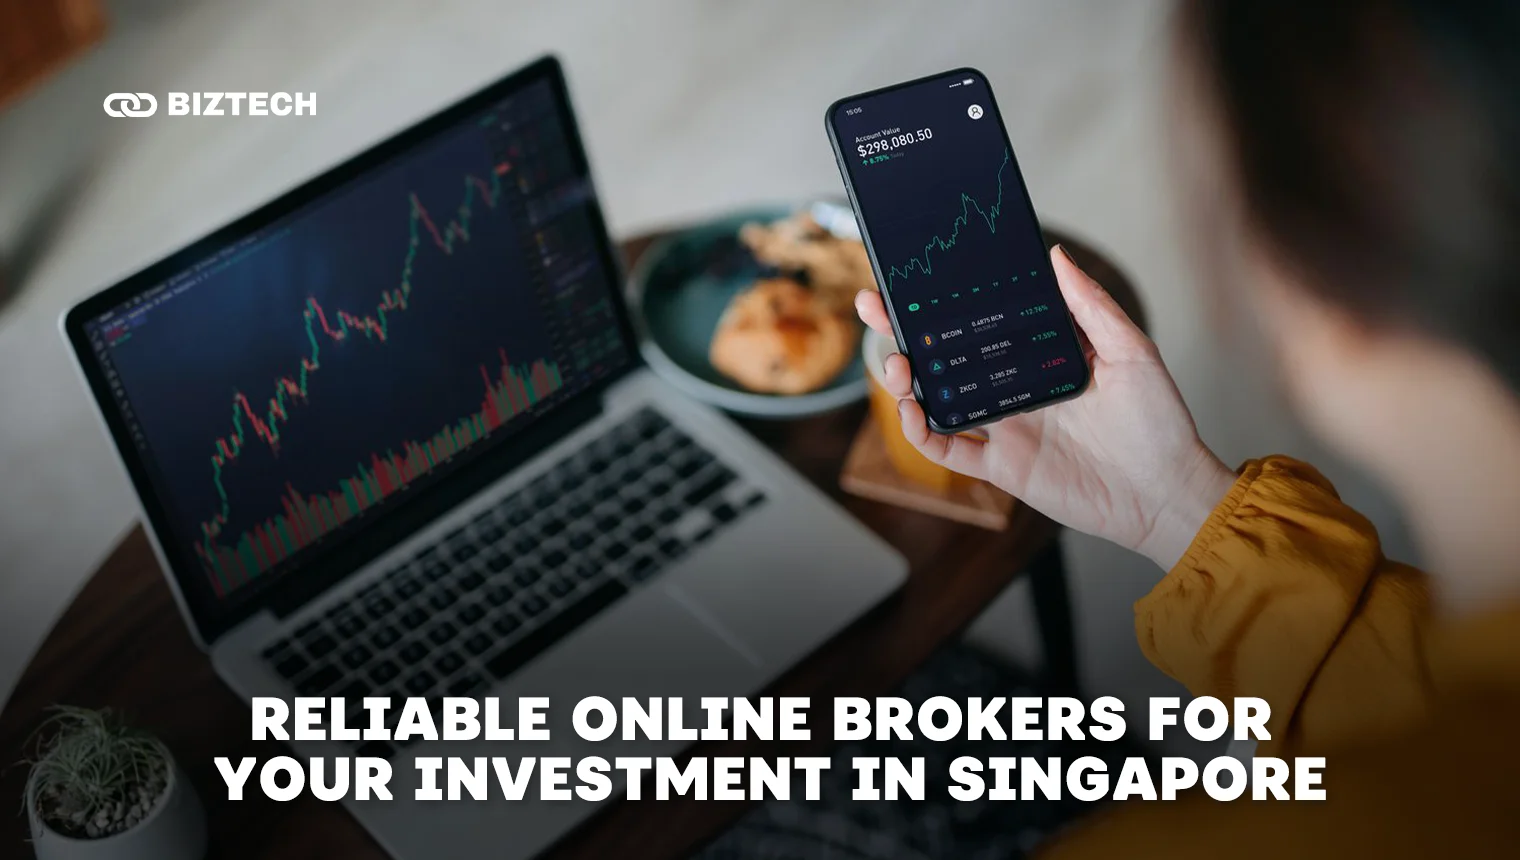 7 Reliable Online Brokers for Your Investment in Singapore